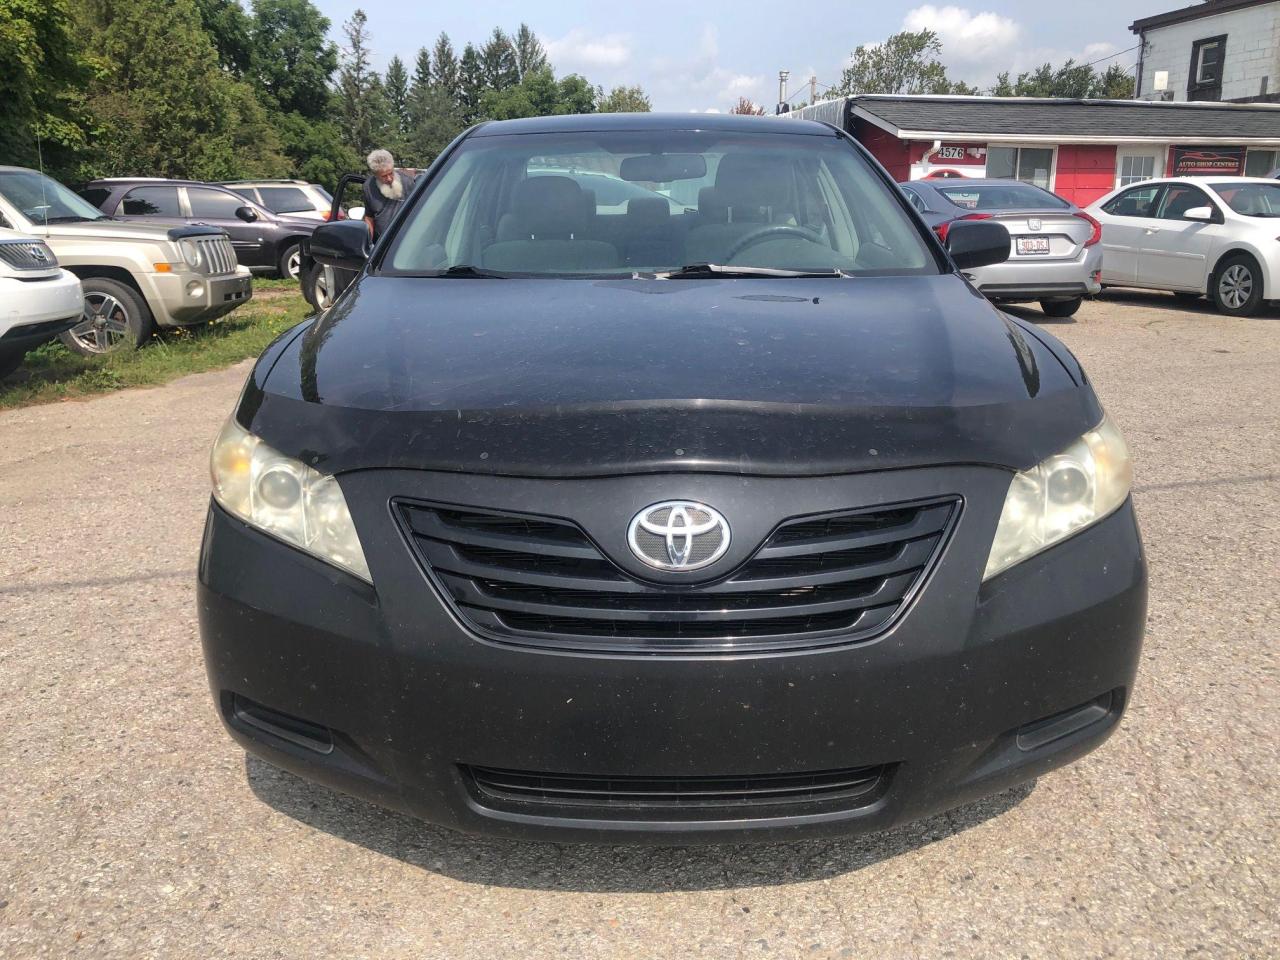 2007 Toyota Camry 4dr Sdn I4 Auto LE**Clean Drives Great*4 Cylinder* - Photo #2